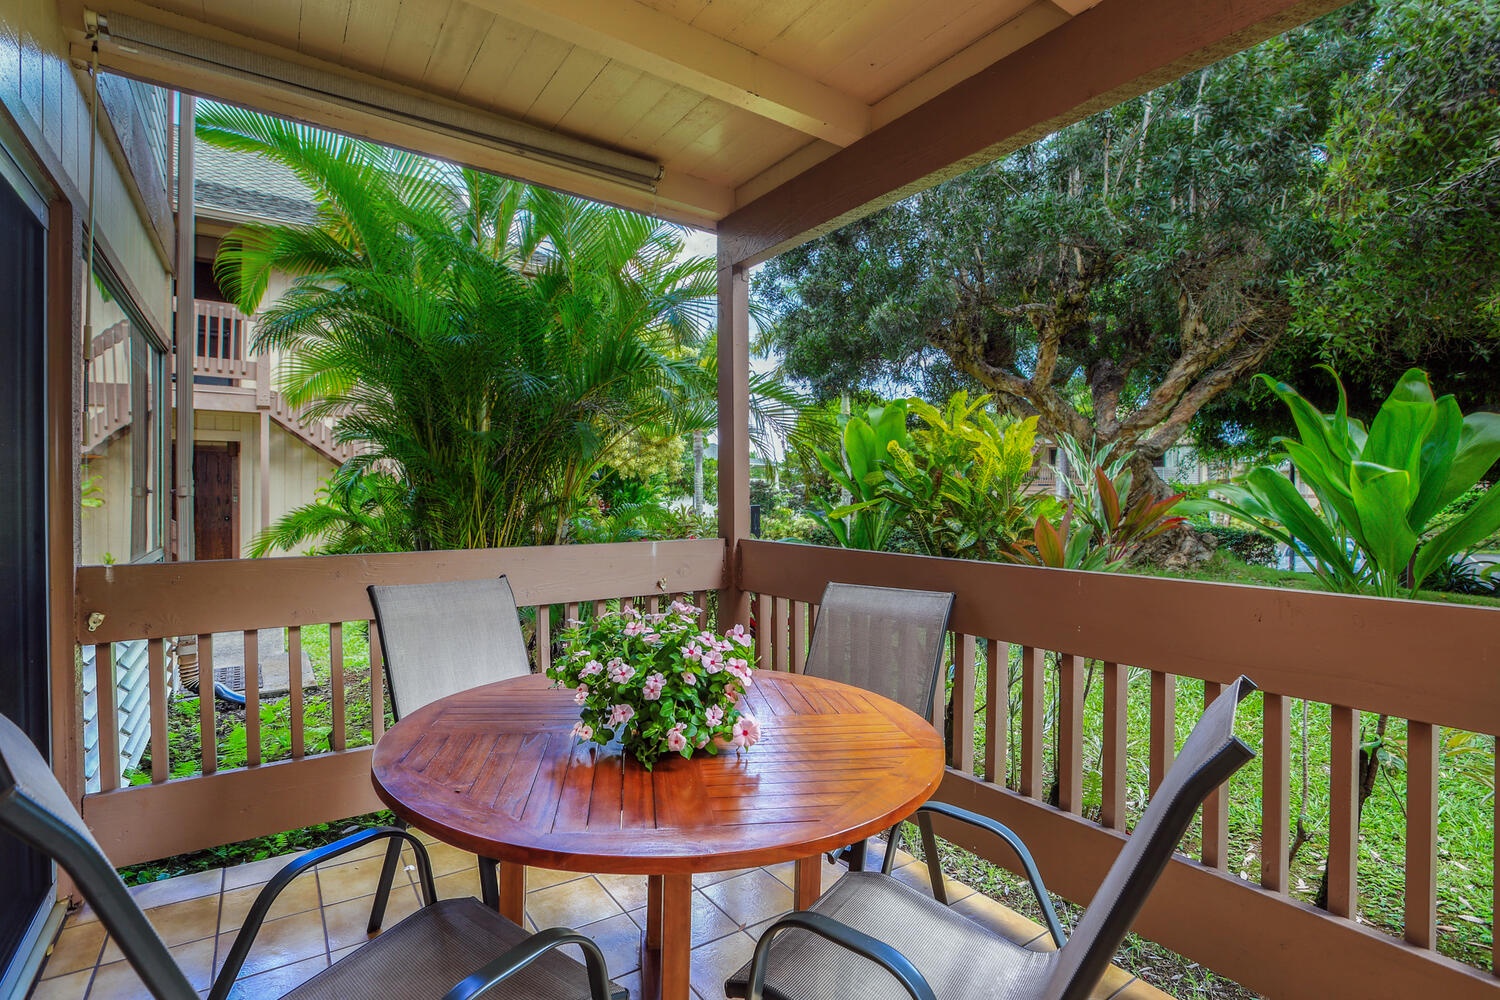 Princeville Vacation Rentals, Hideaway Haven - Savor al fresco meals or have a good morning conversation at the lanai, a serene outdoor oasis.